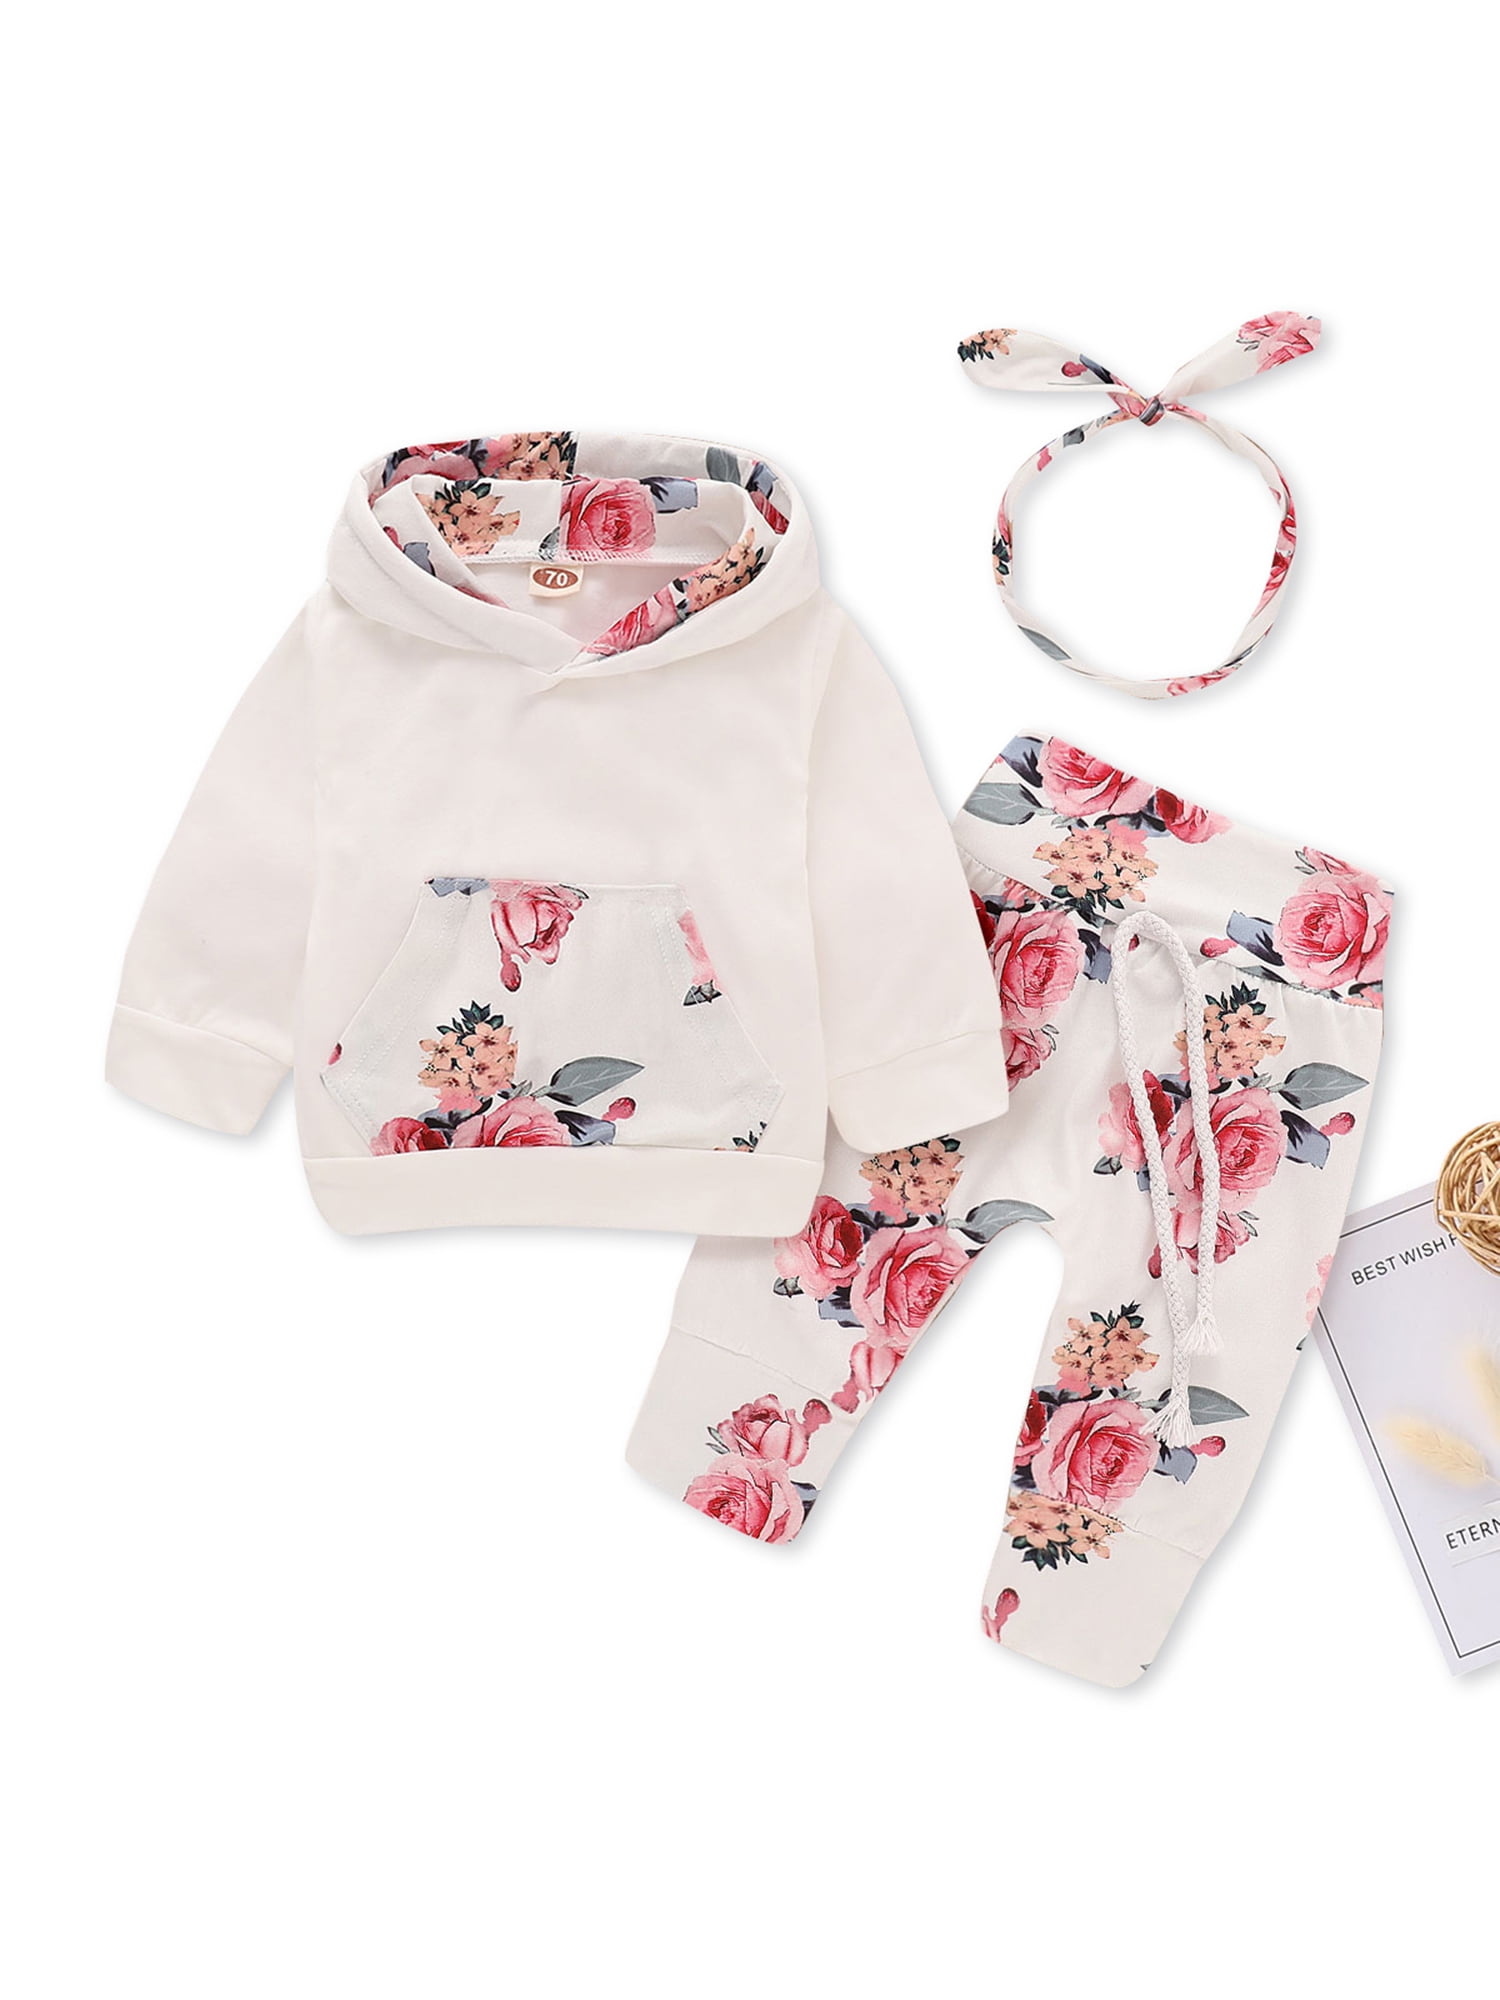 Newborn Baby Girls Long Sleeve Floral Hoodie Sweatshirt Tops with Pant Headband Clothes Set Outfits